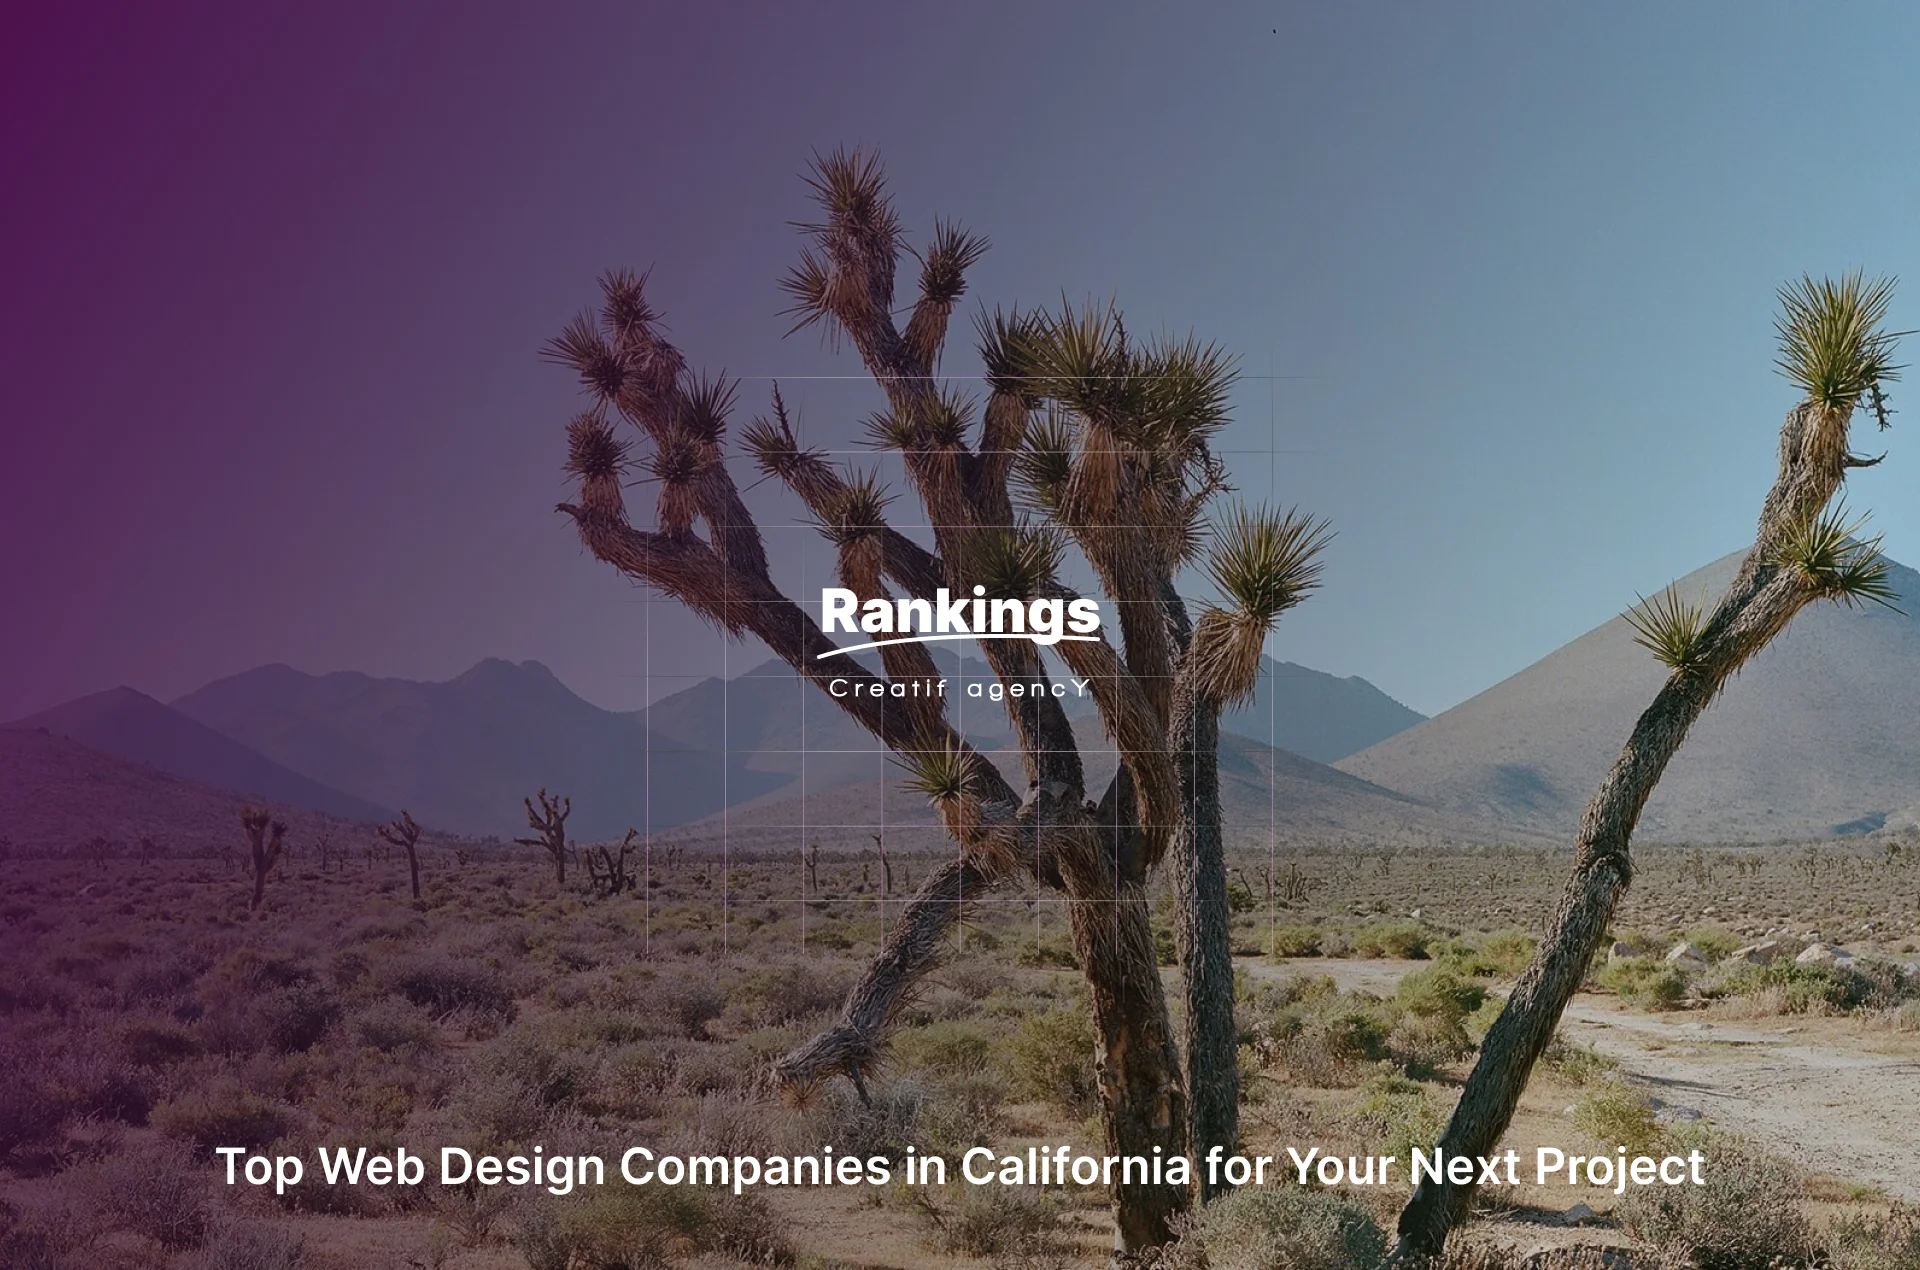 Top Web Design Companies in California for Your Next Project